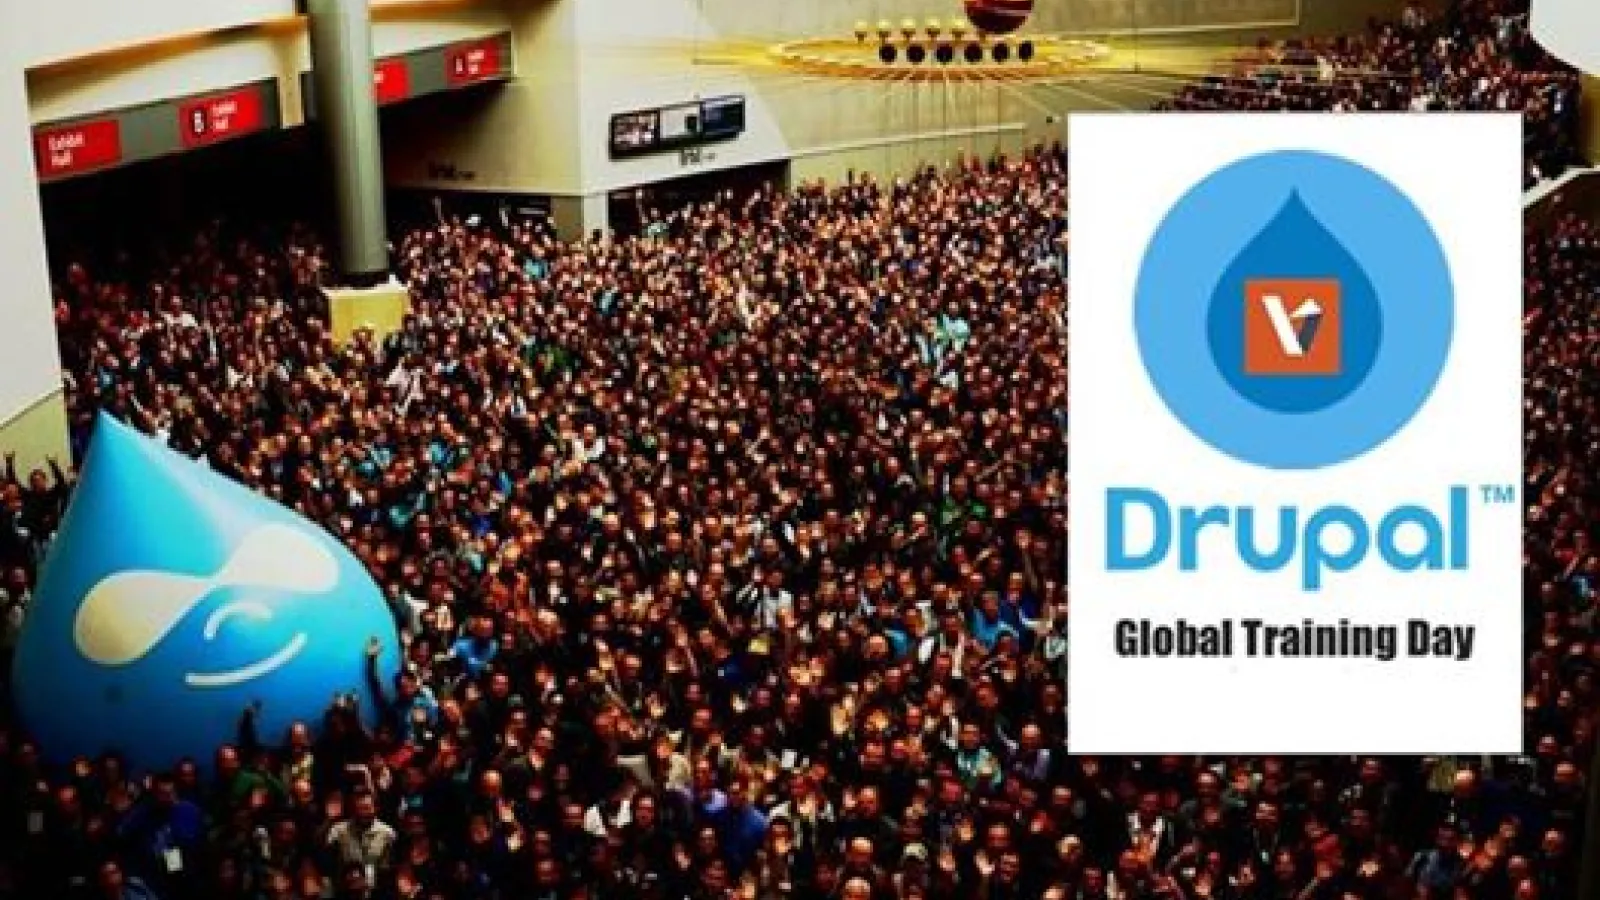 Drupal Global Training Day on March 18 at Valuebound